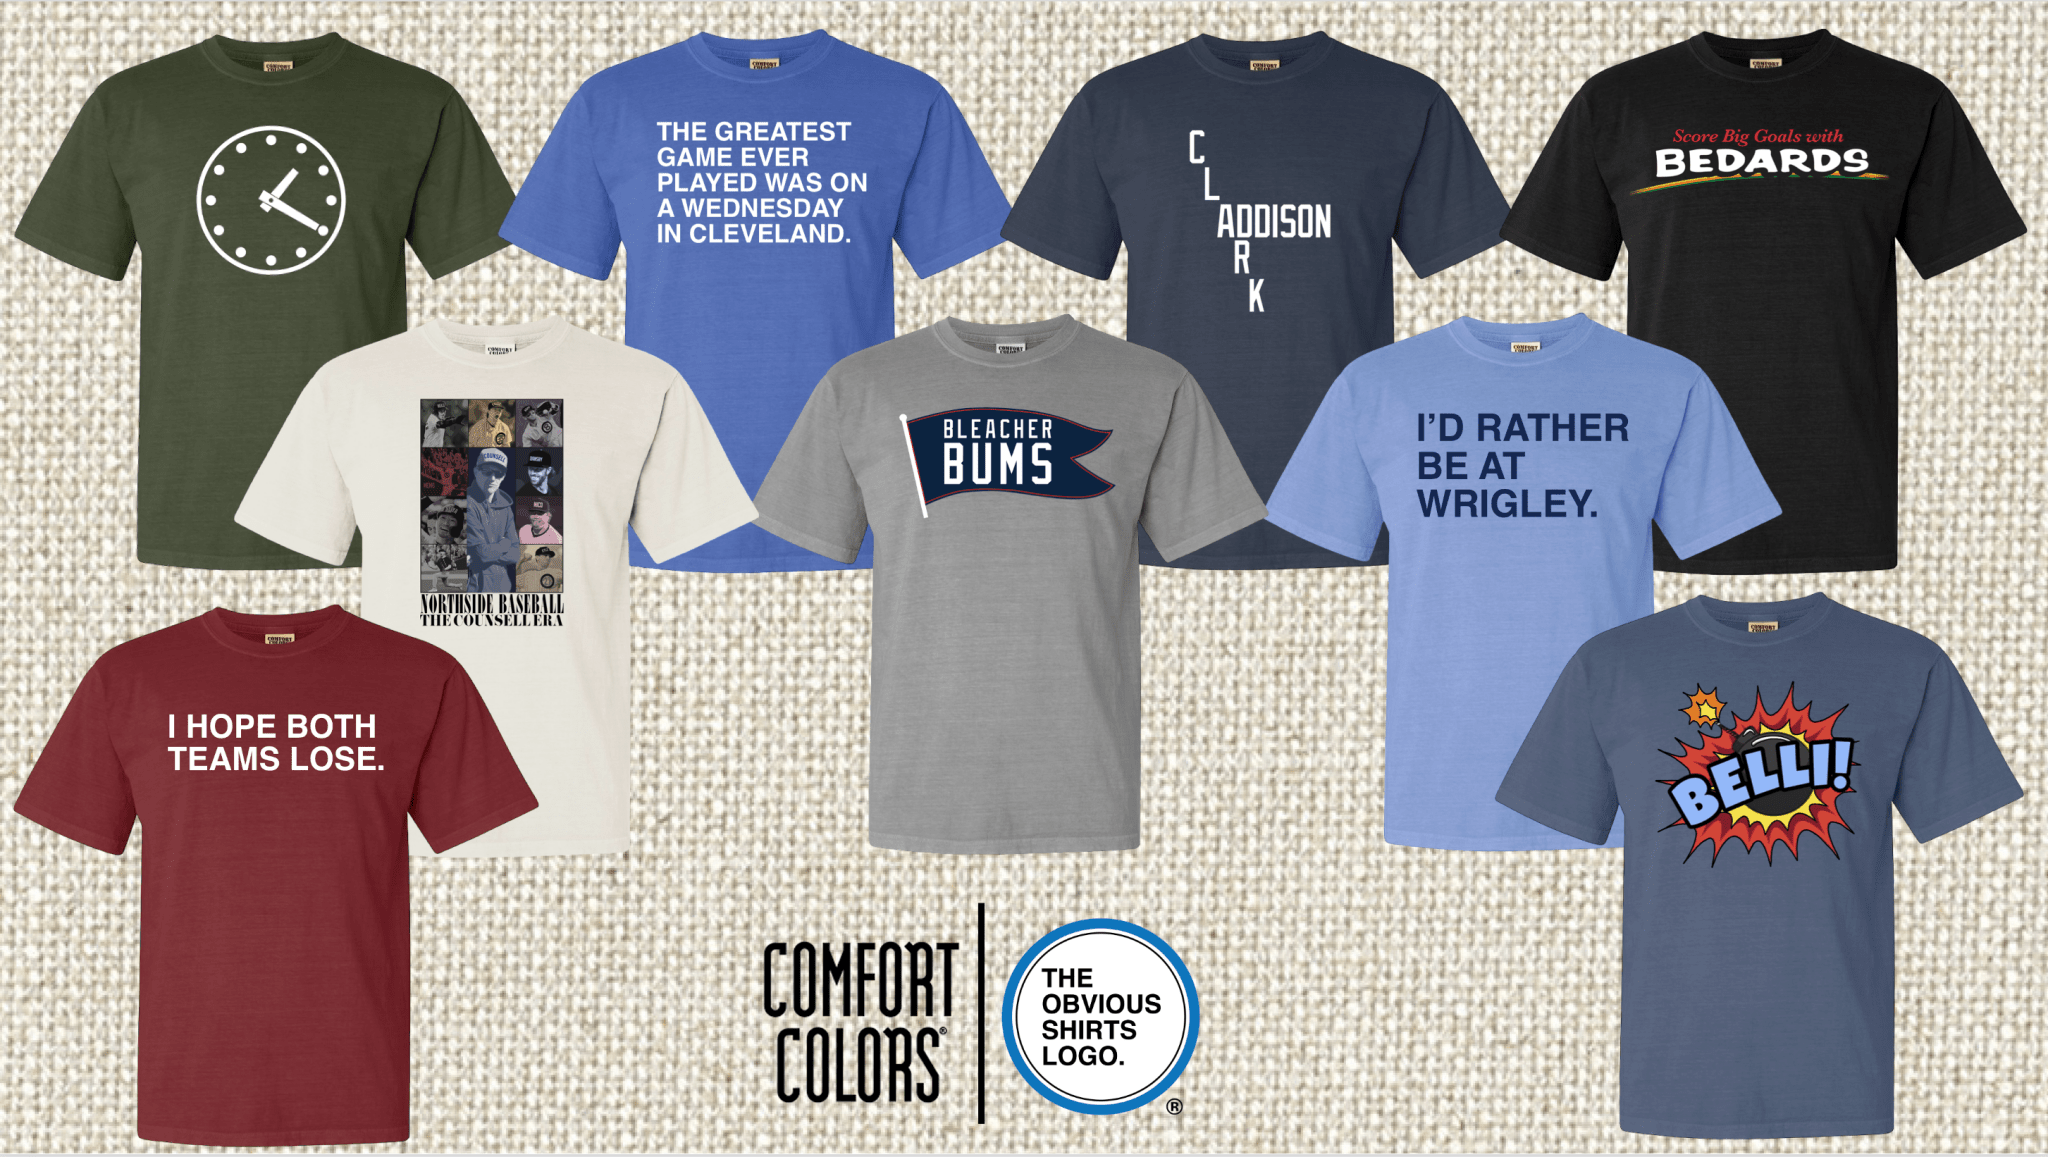 COMFORT COLORS - OBVIOUS SHIRTS